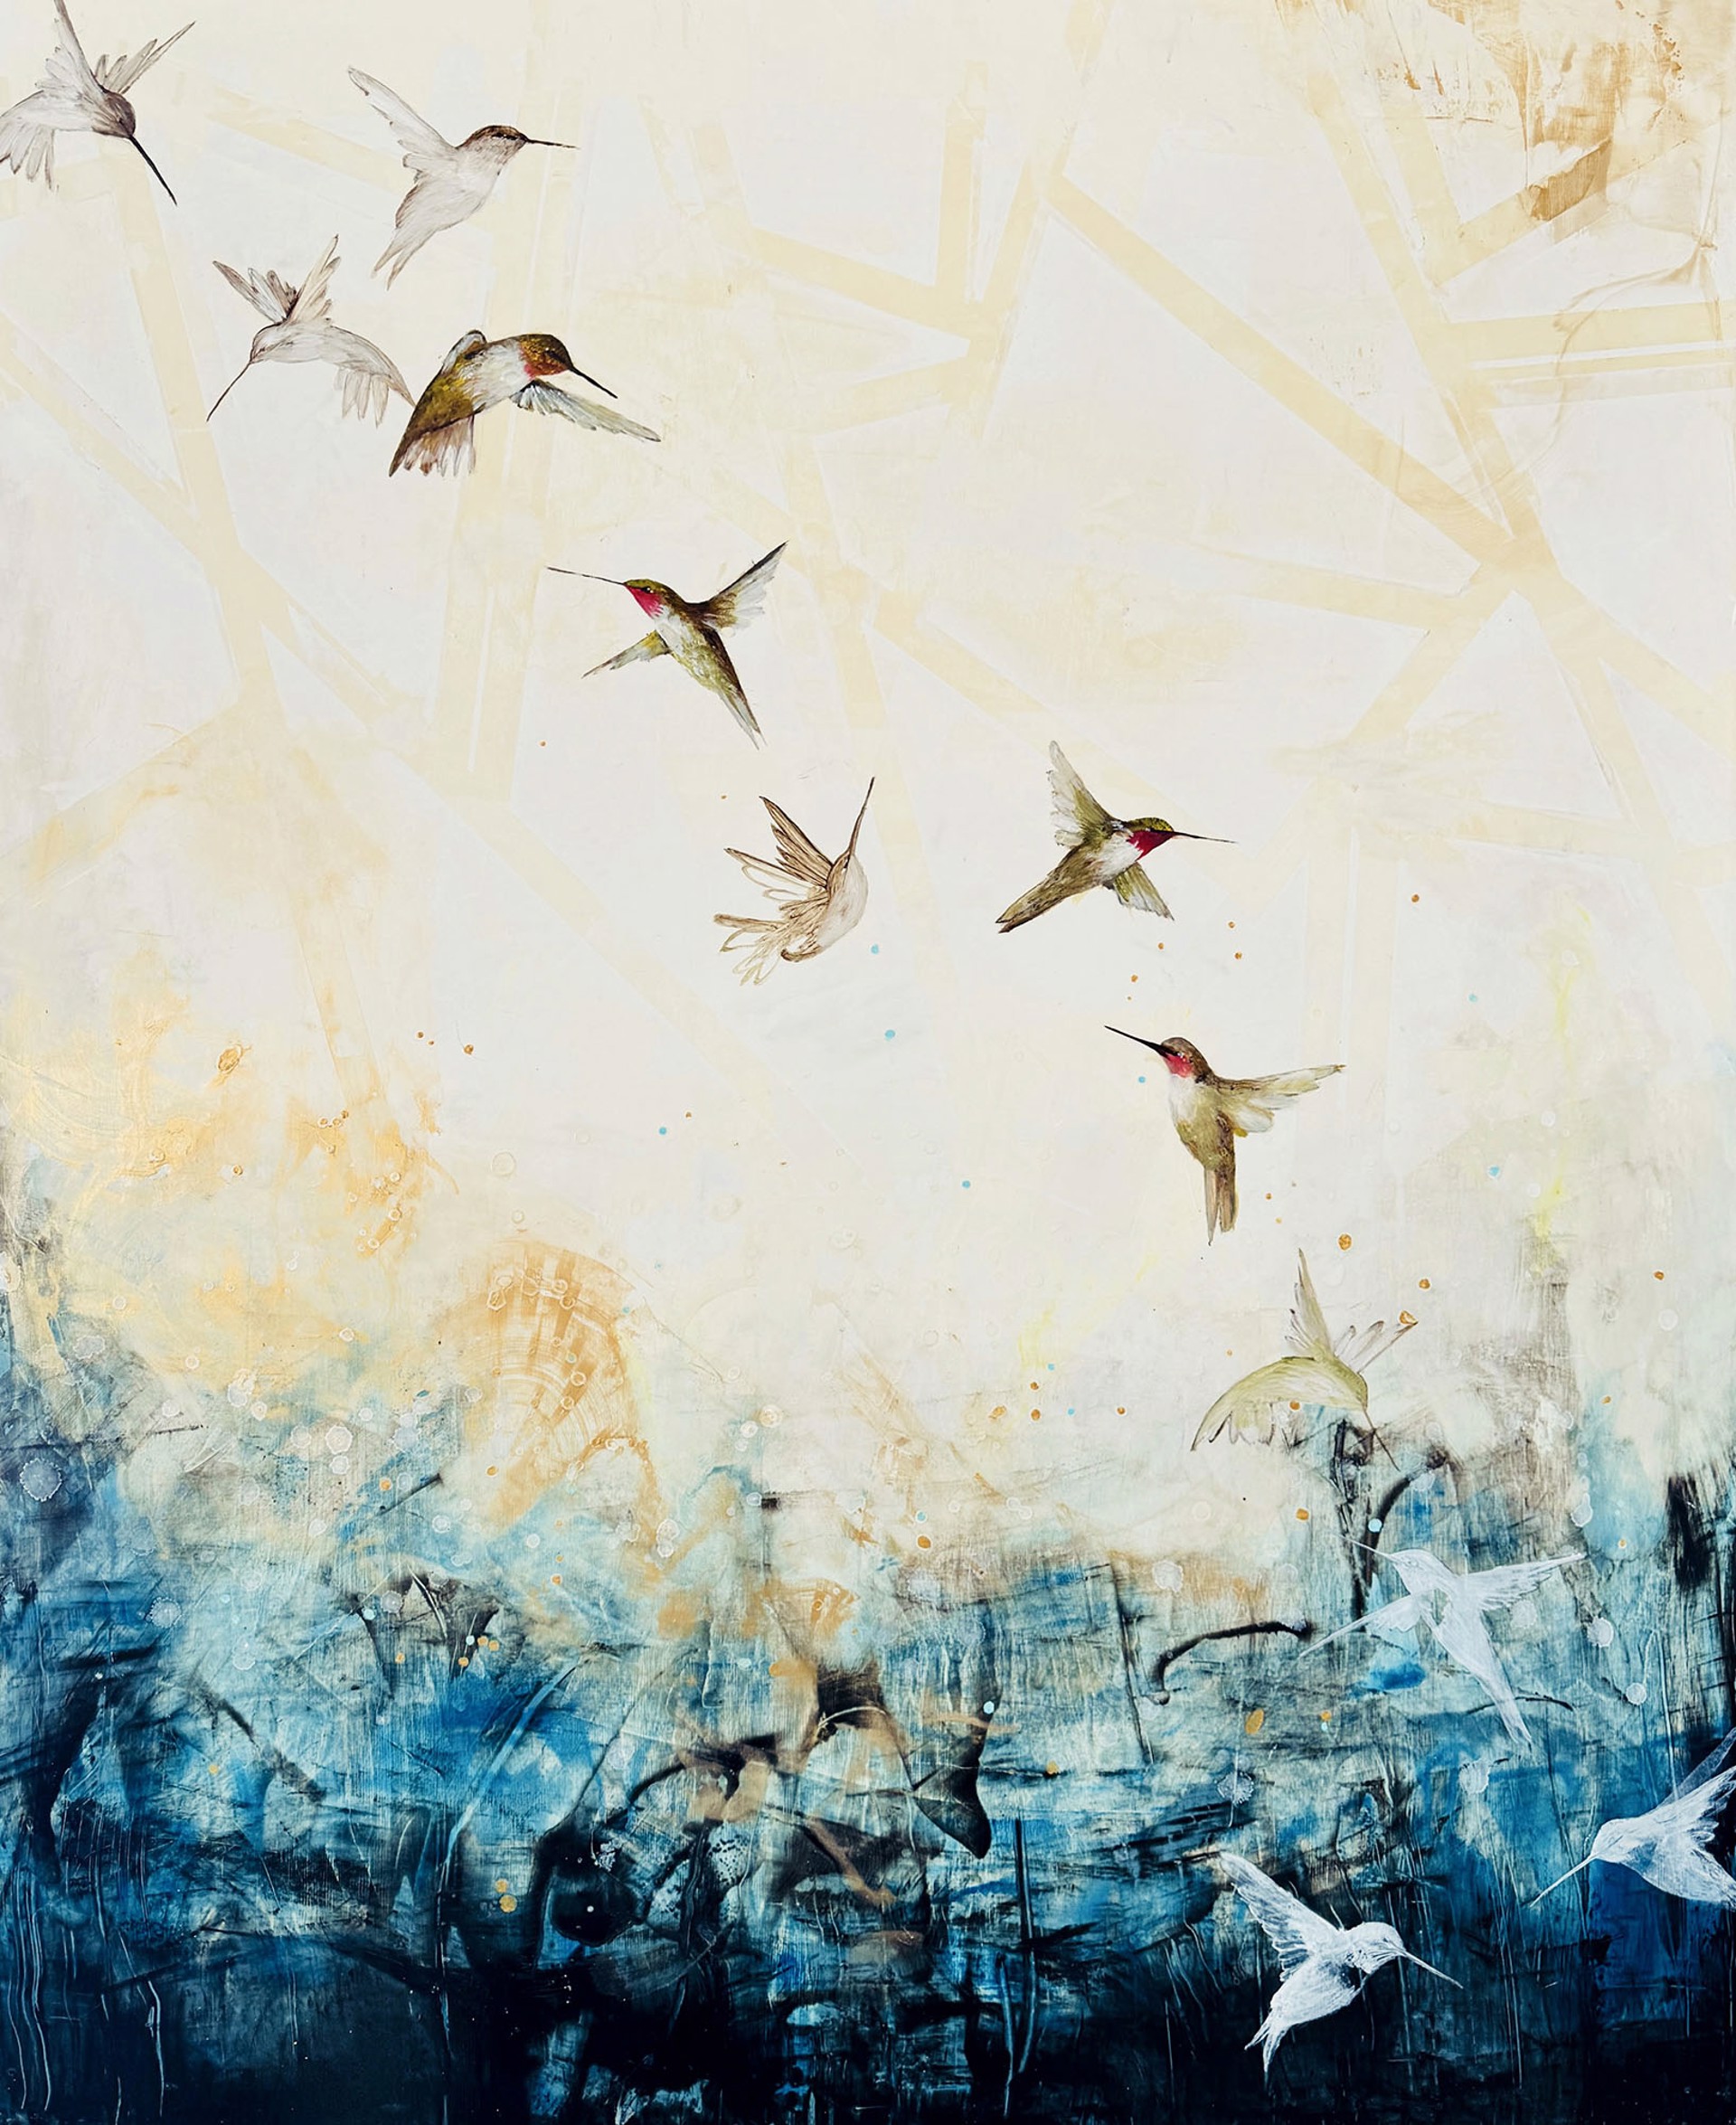 Original Oil Painting By Jenna Von Benedikt Featuring A Group Of Hummingbird Flying Diagonally Across An Abstracted Background In Blues